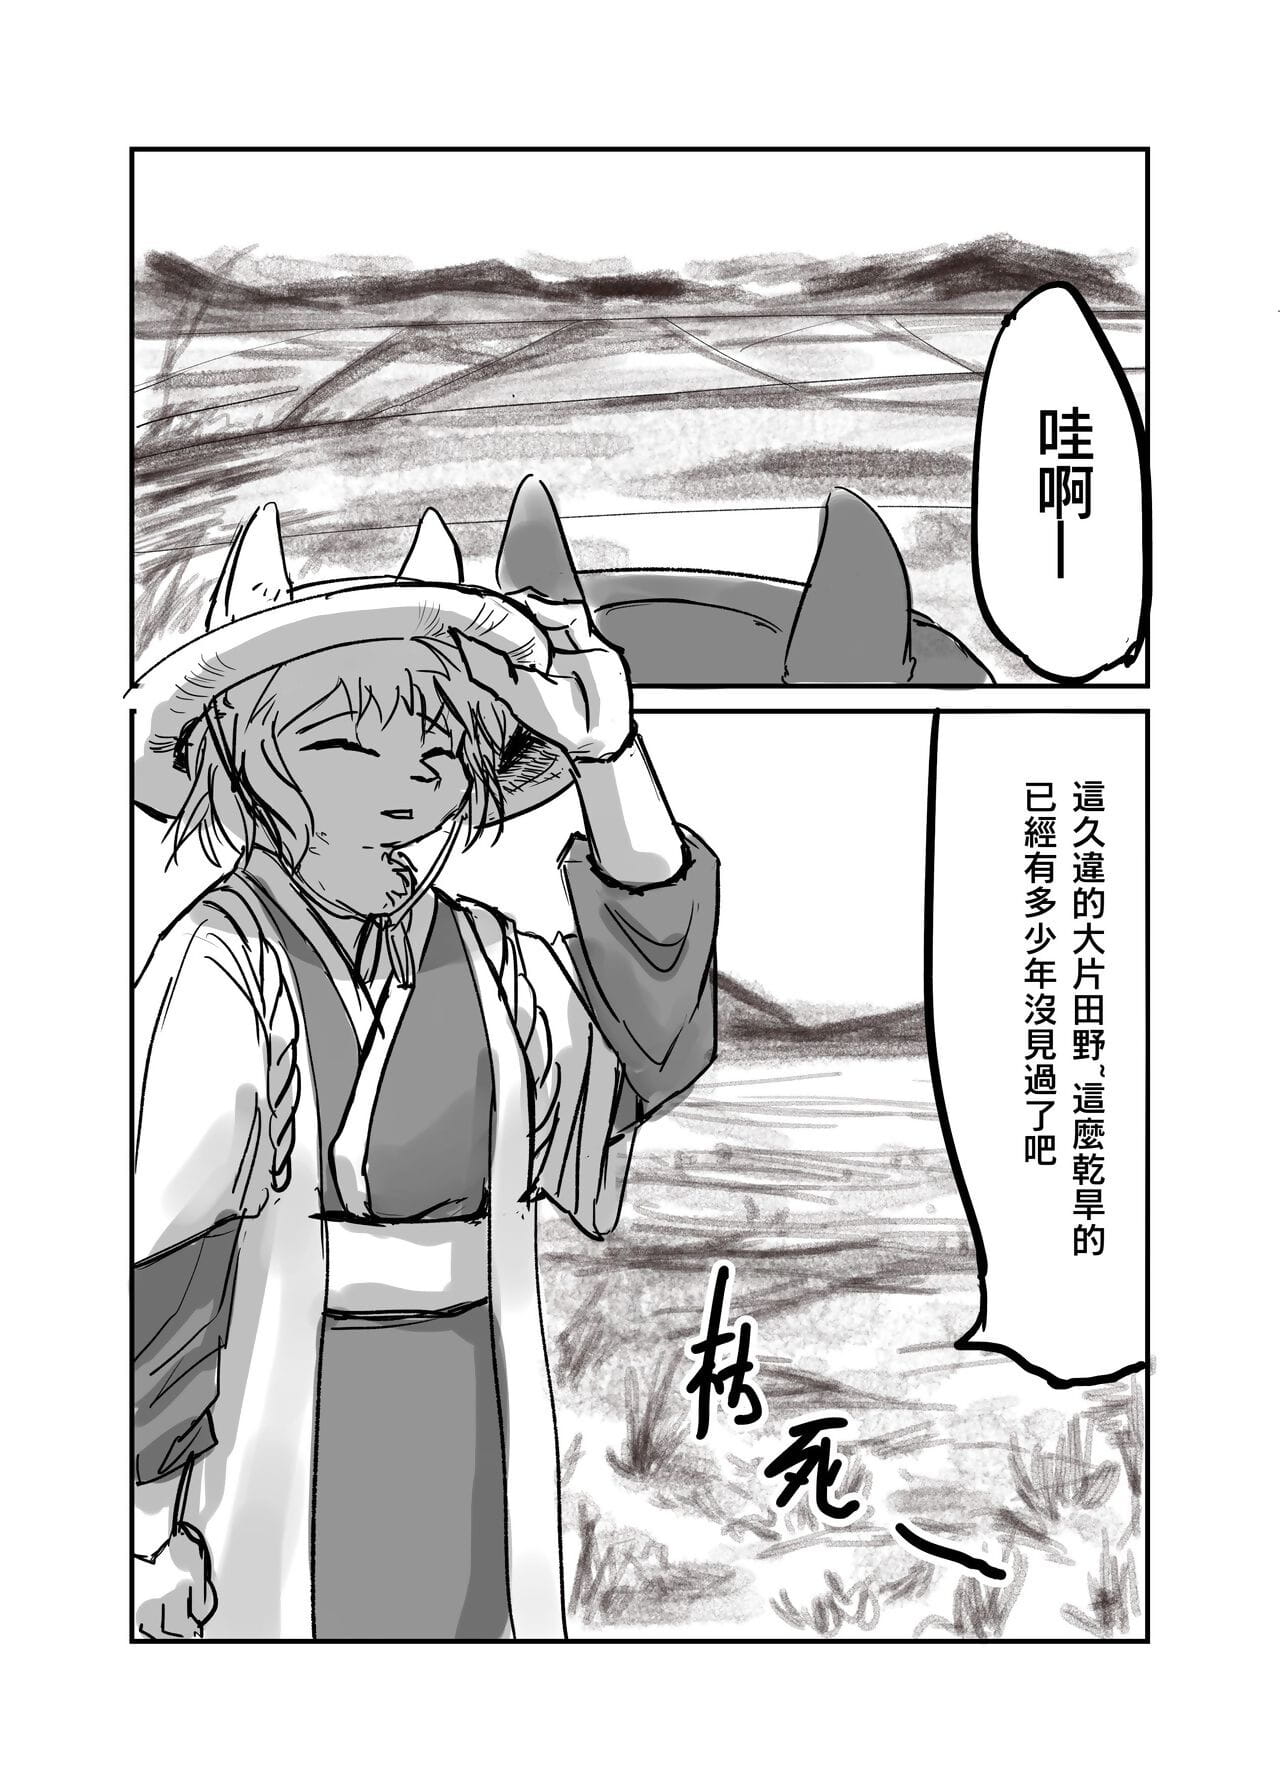 （the お客様 他乡之人 by：鬼流 page 1